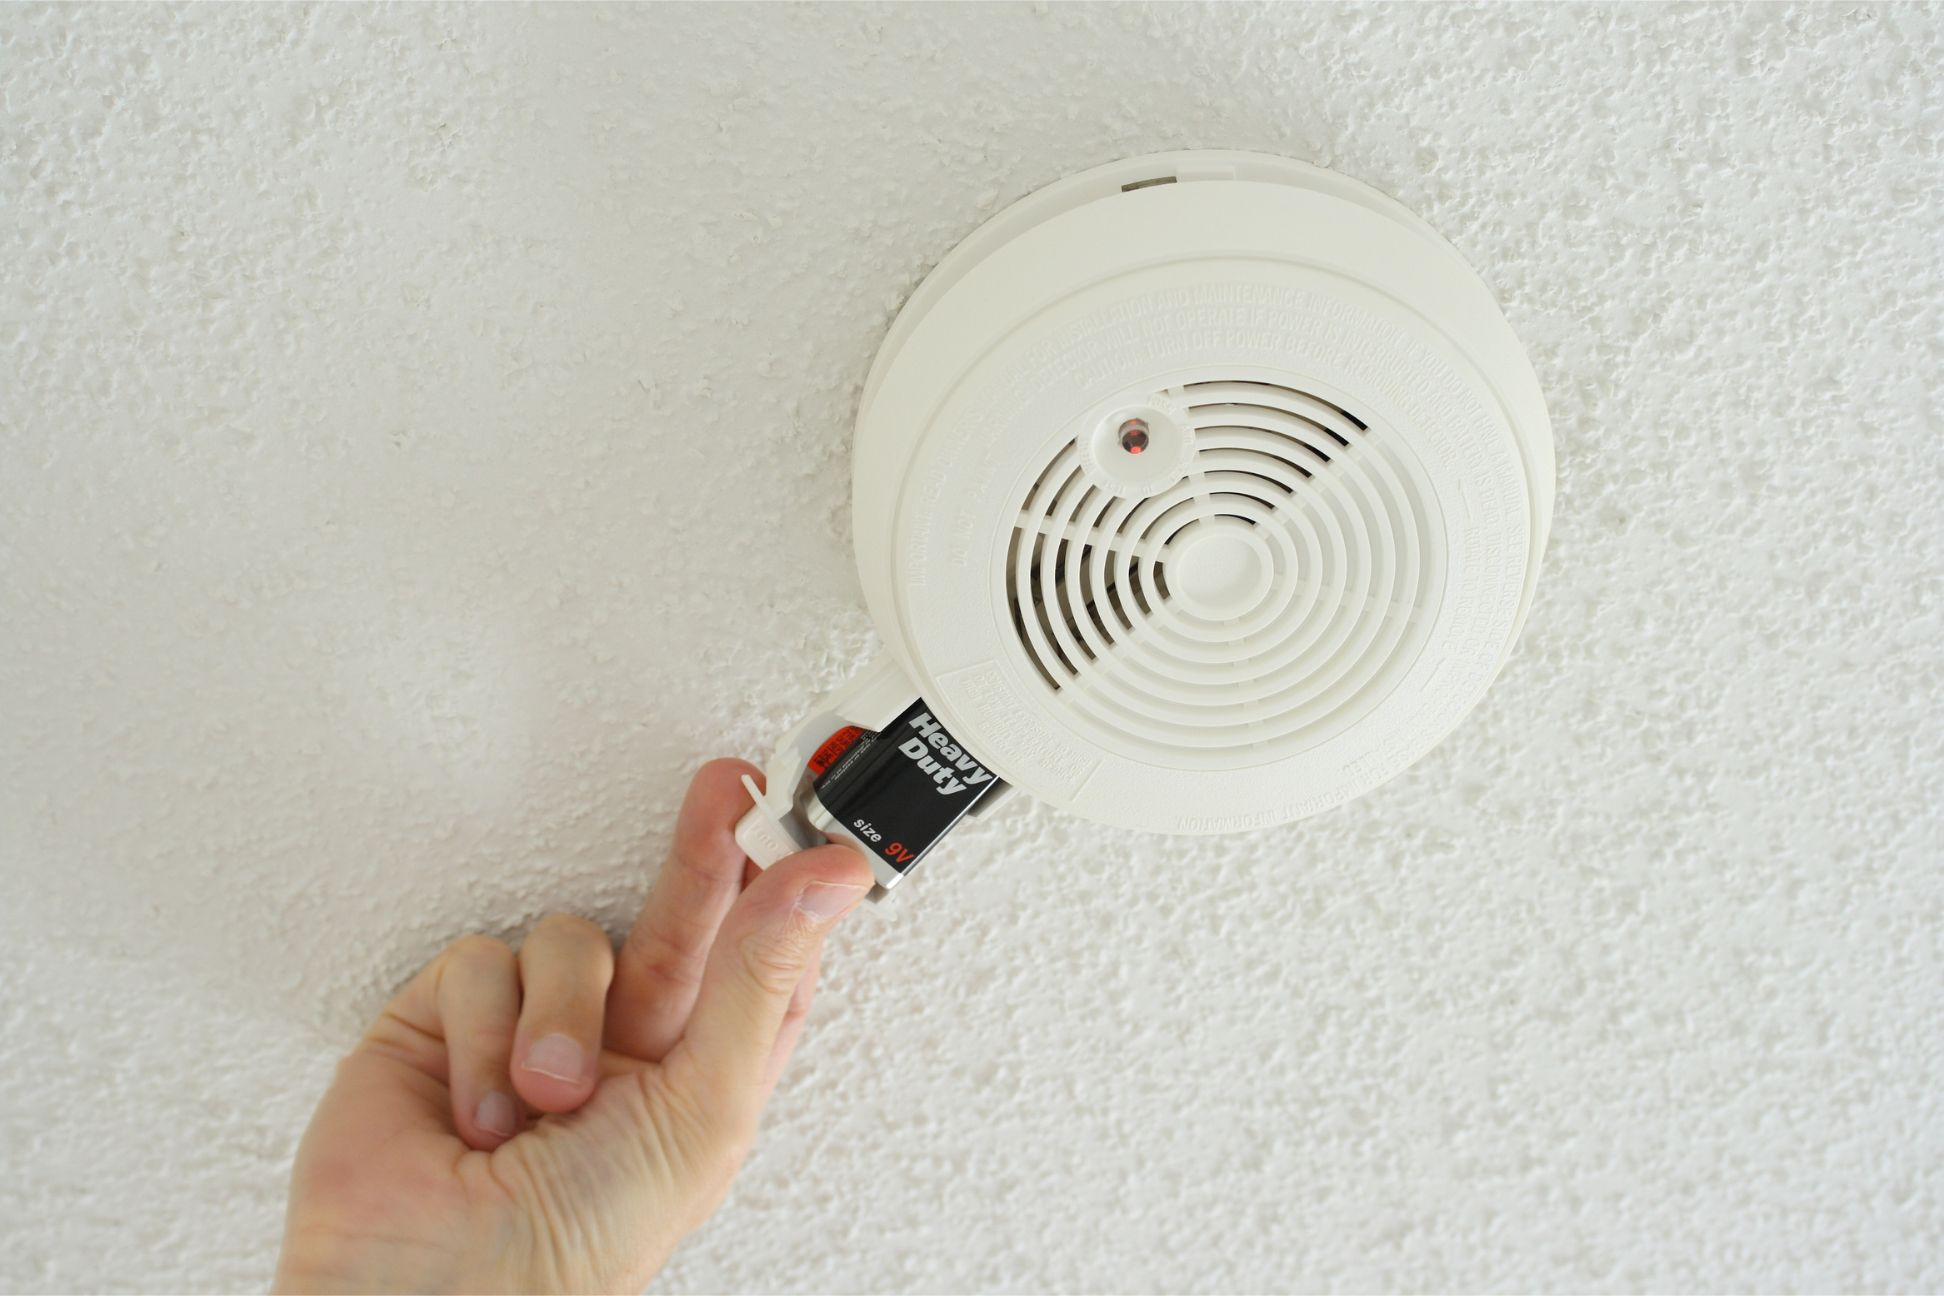 How To Determine If A Smoke Detector Needs A New Battery